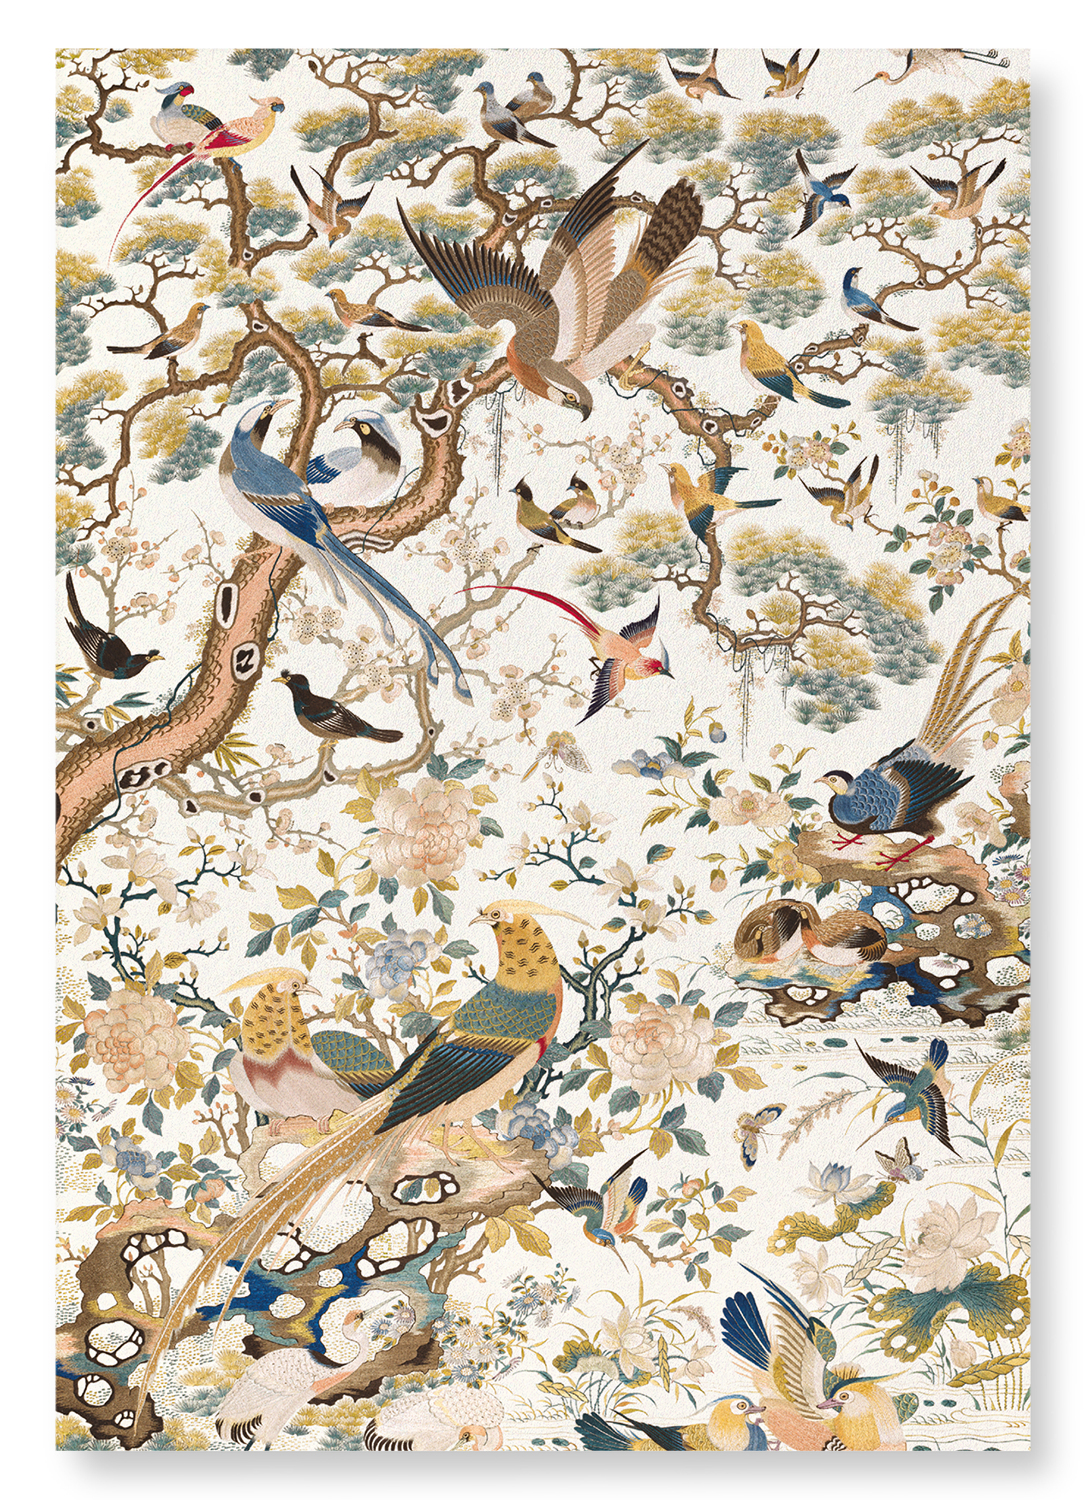 EMBROIDERED PANEL (18TH C)